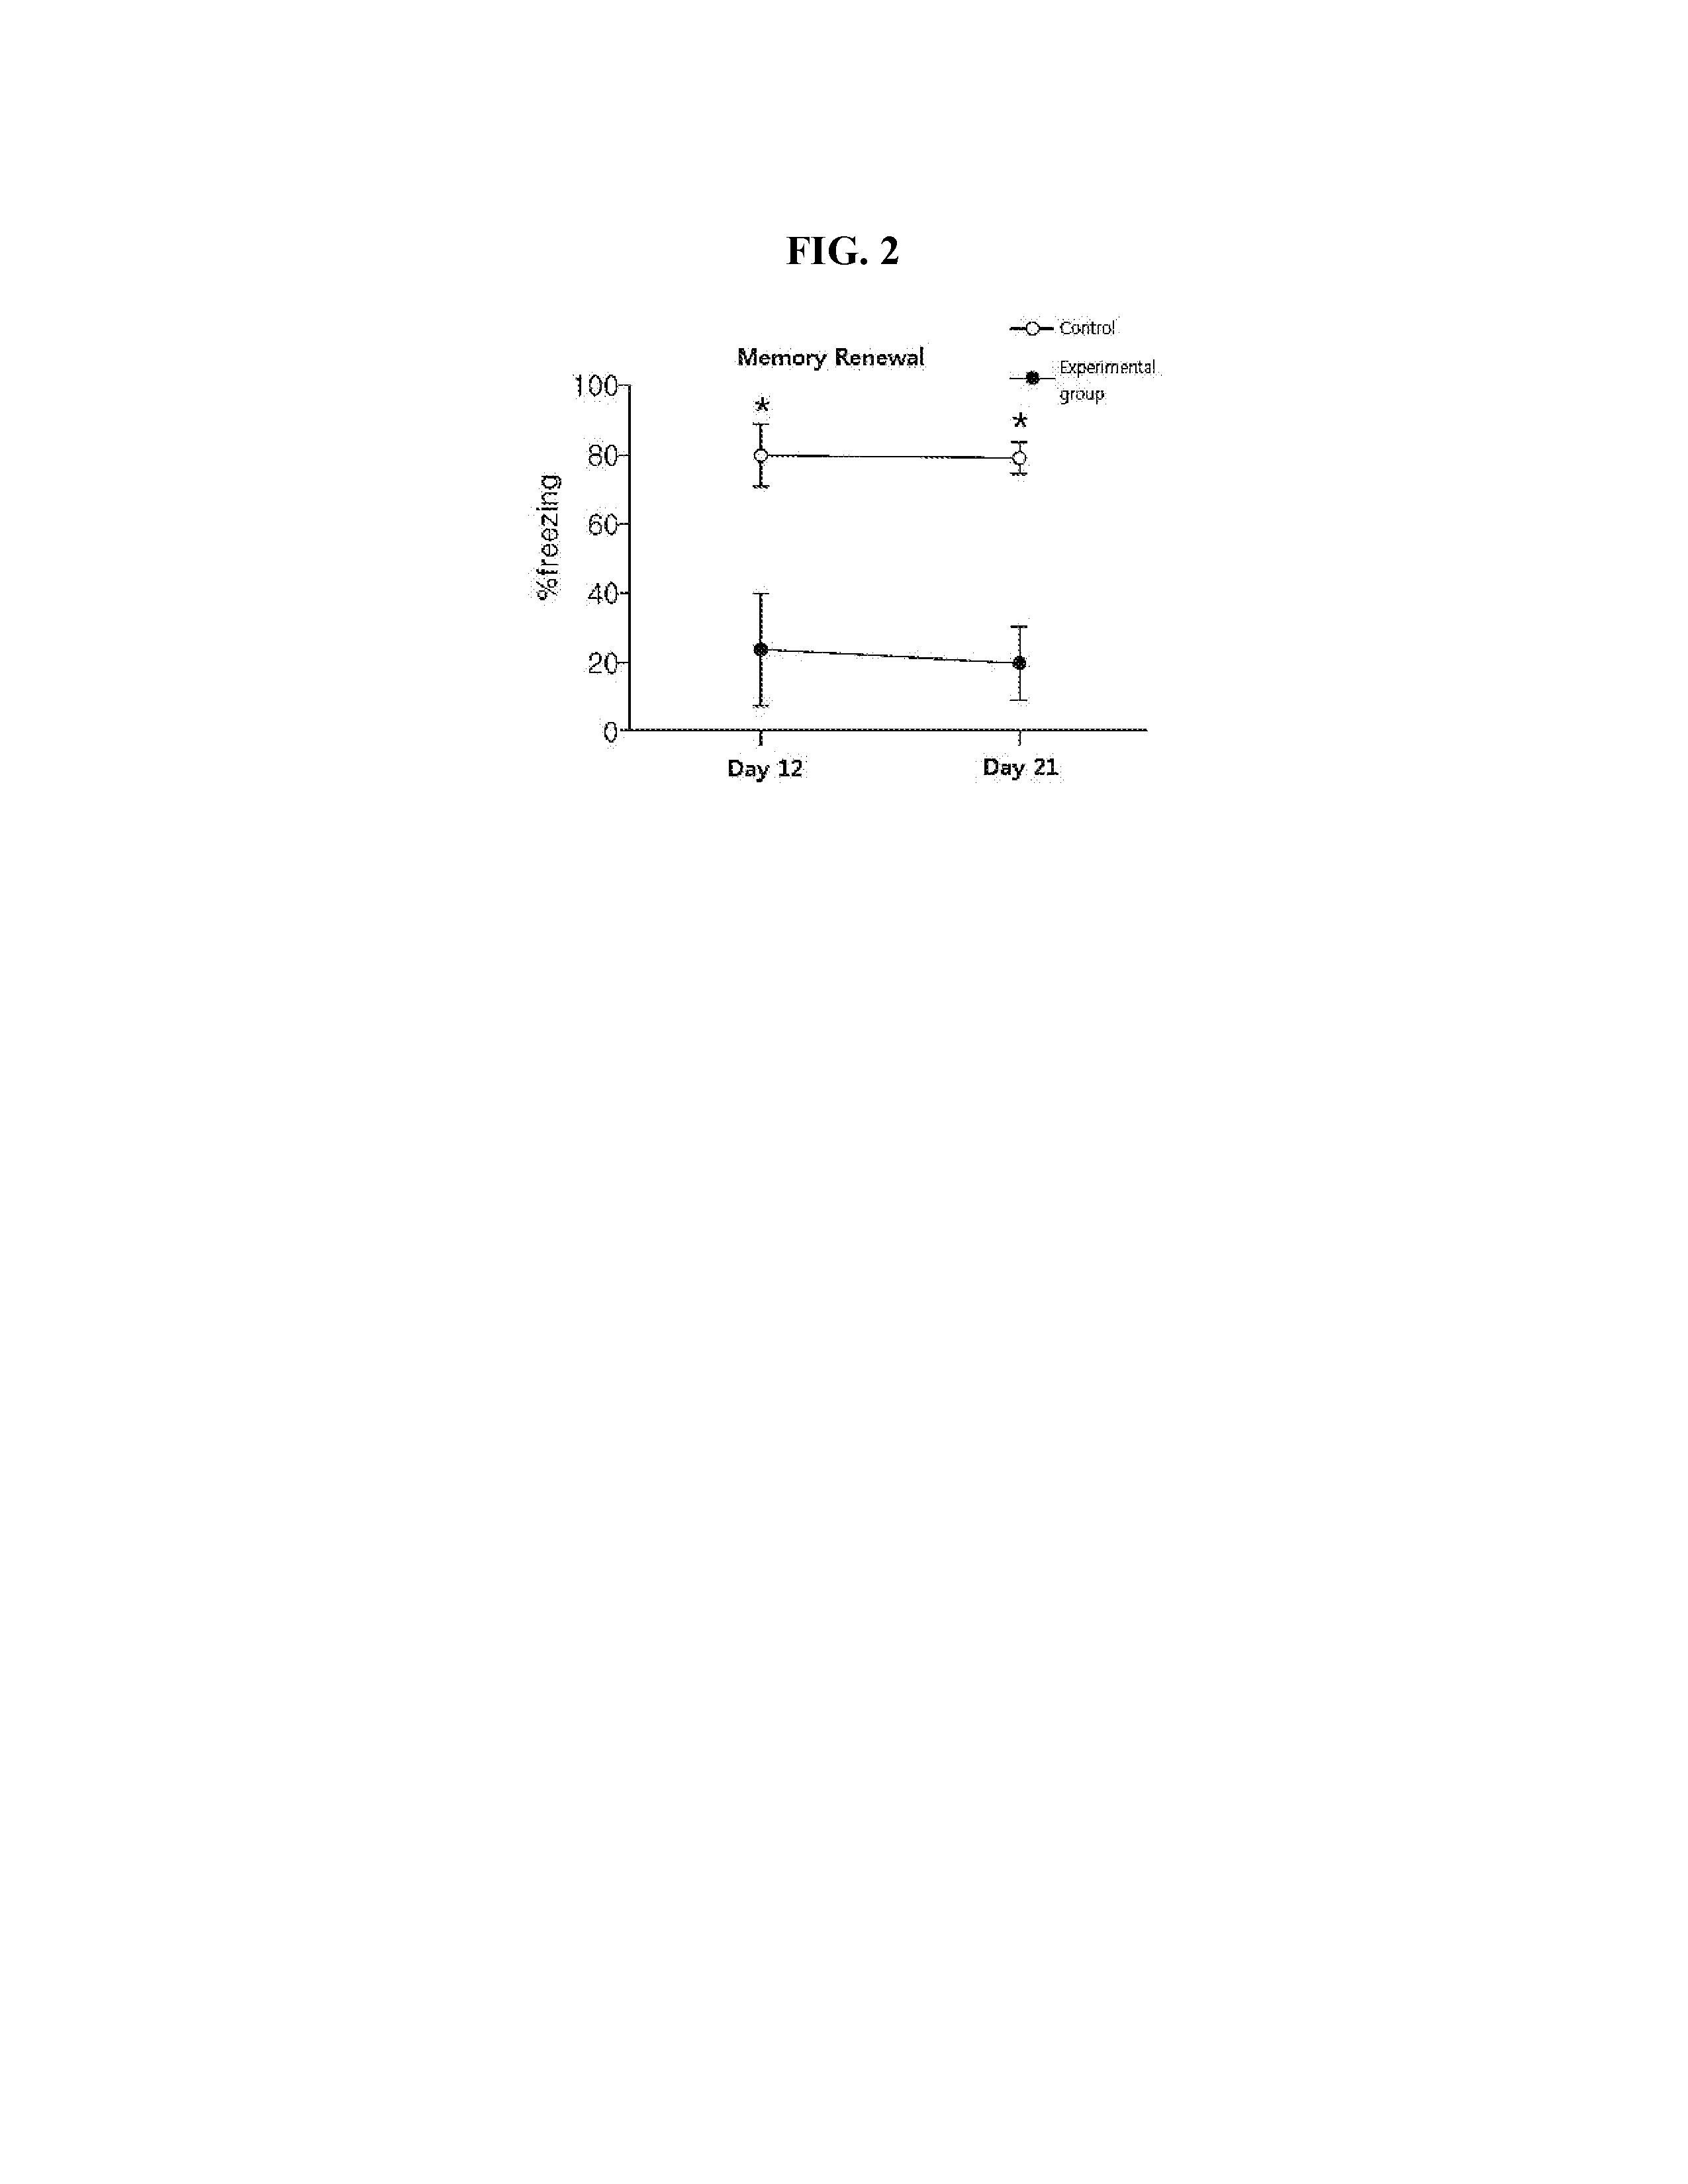 Pharmaceutical composition comprising n-acetyl-l-cysteine or its derivatives for treating anxiety disorder